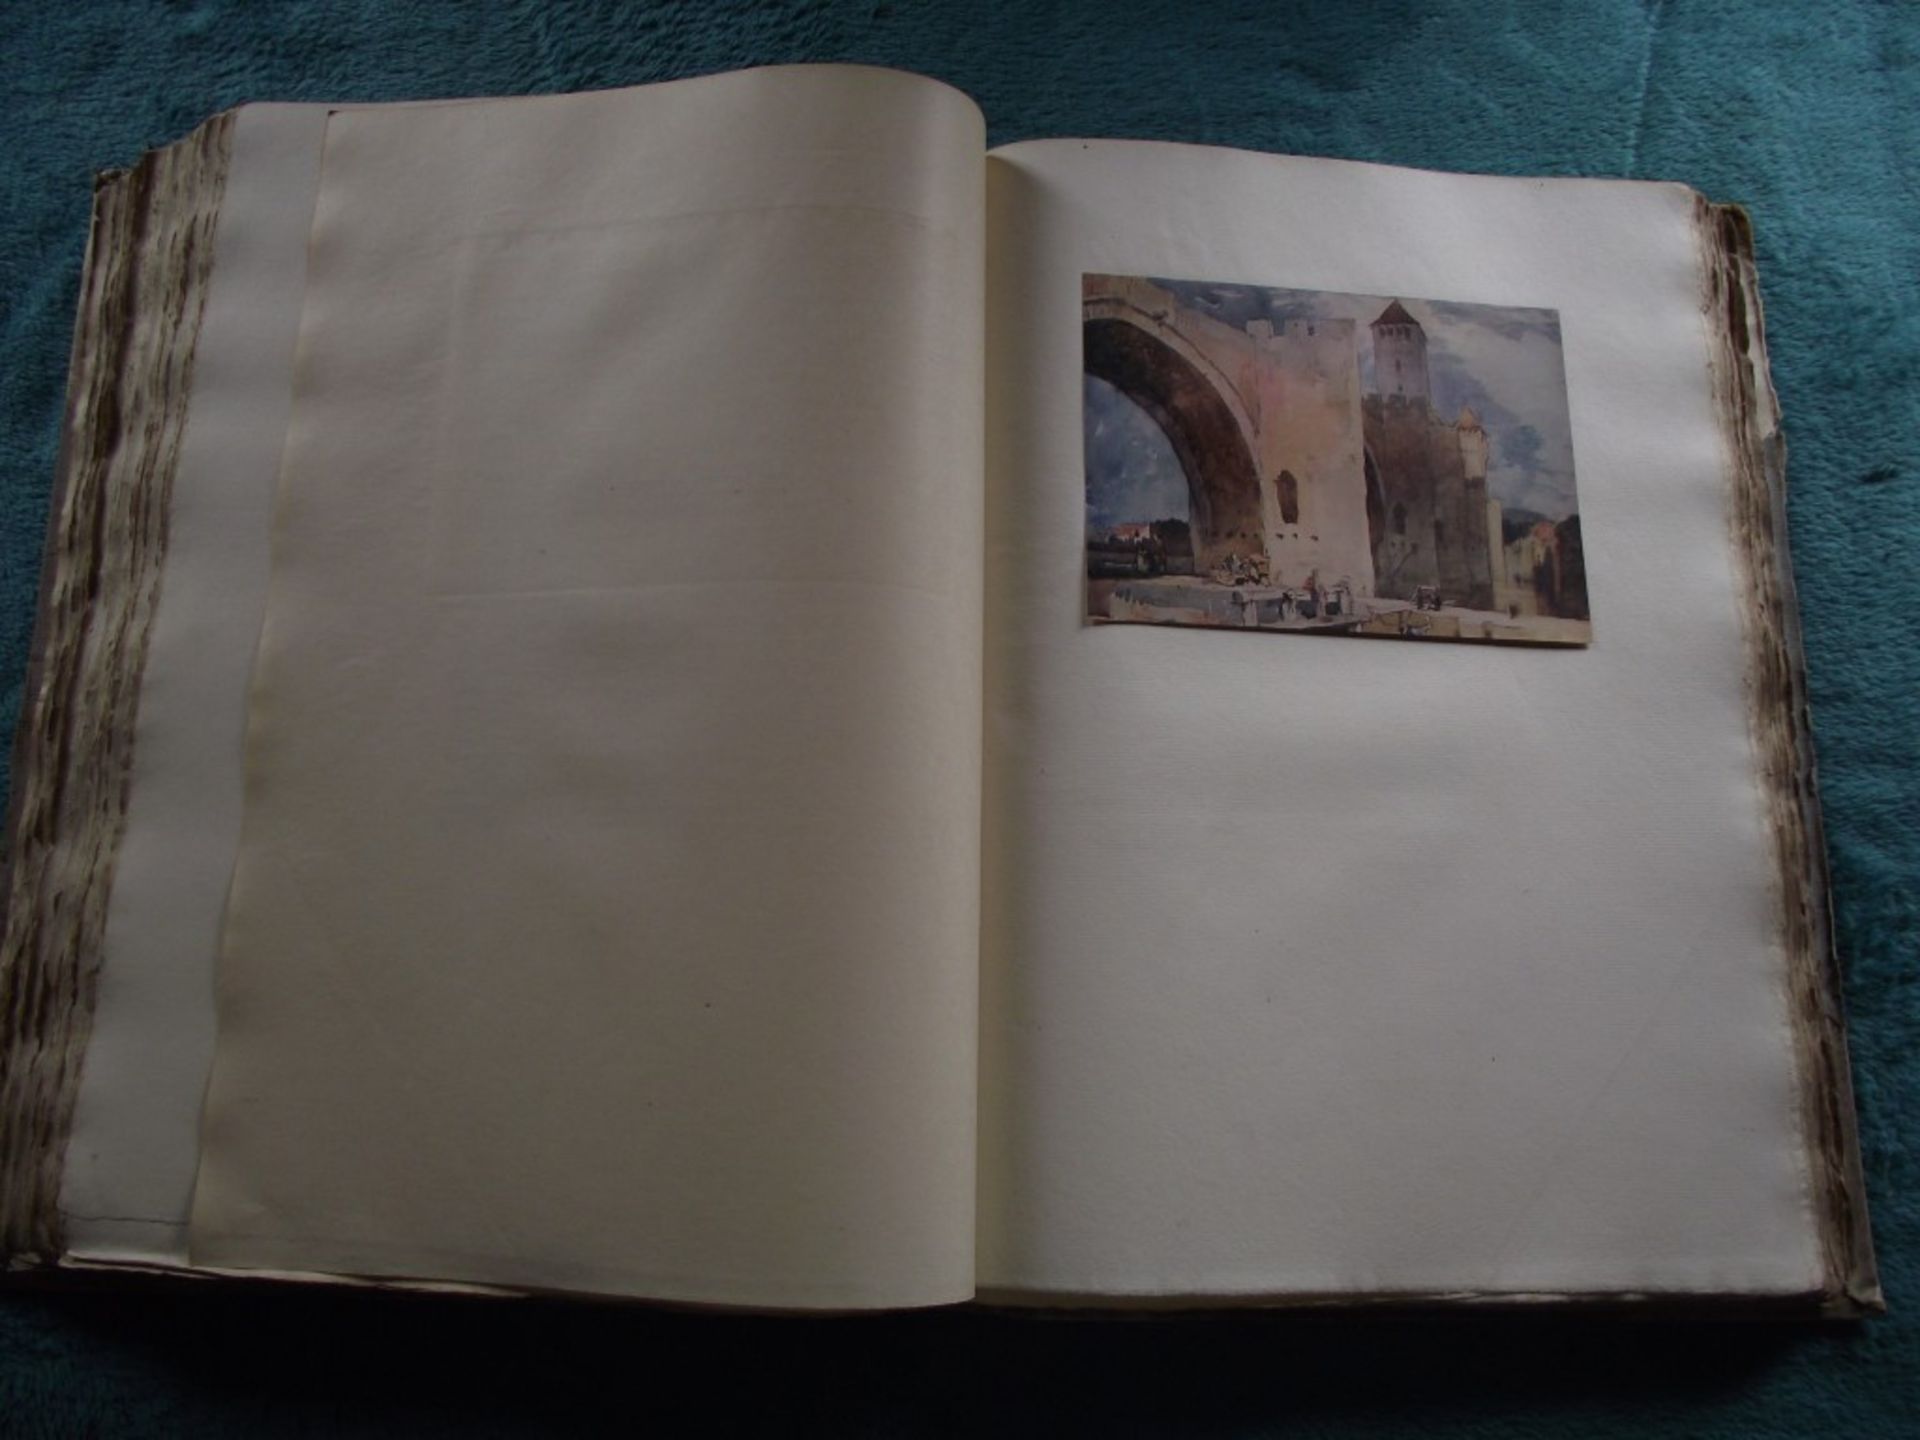 A Book of Bridges by Frank Brangwyn & Walter Shaw Sparrow - Ltd. Edit. 17/75 with Signed Lithograph. - Image 49 of 64